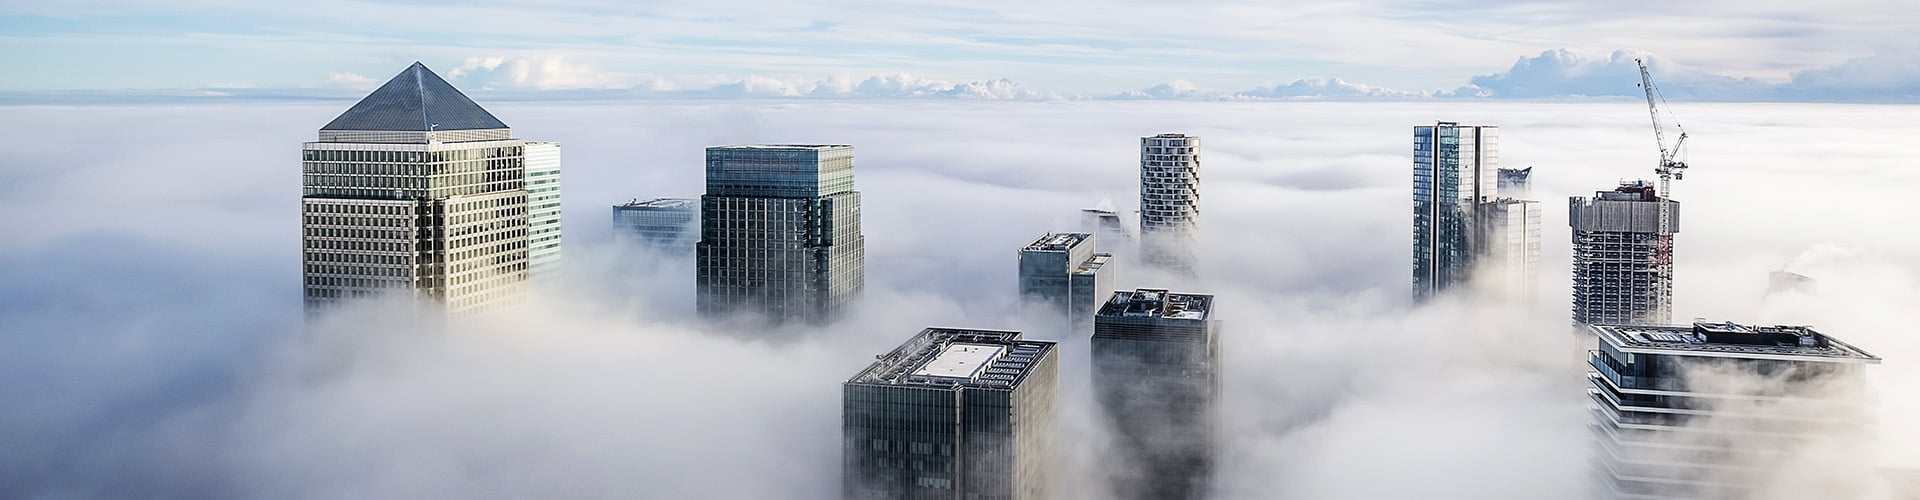 City skyscrapers visible through clouds